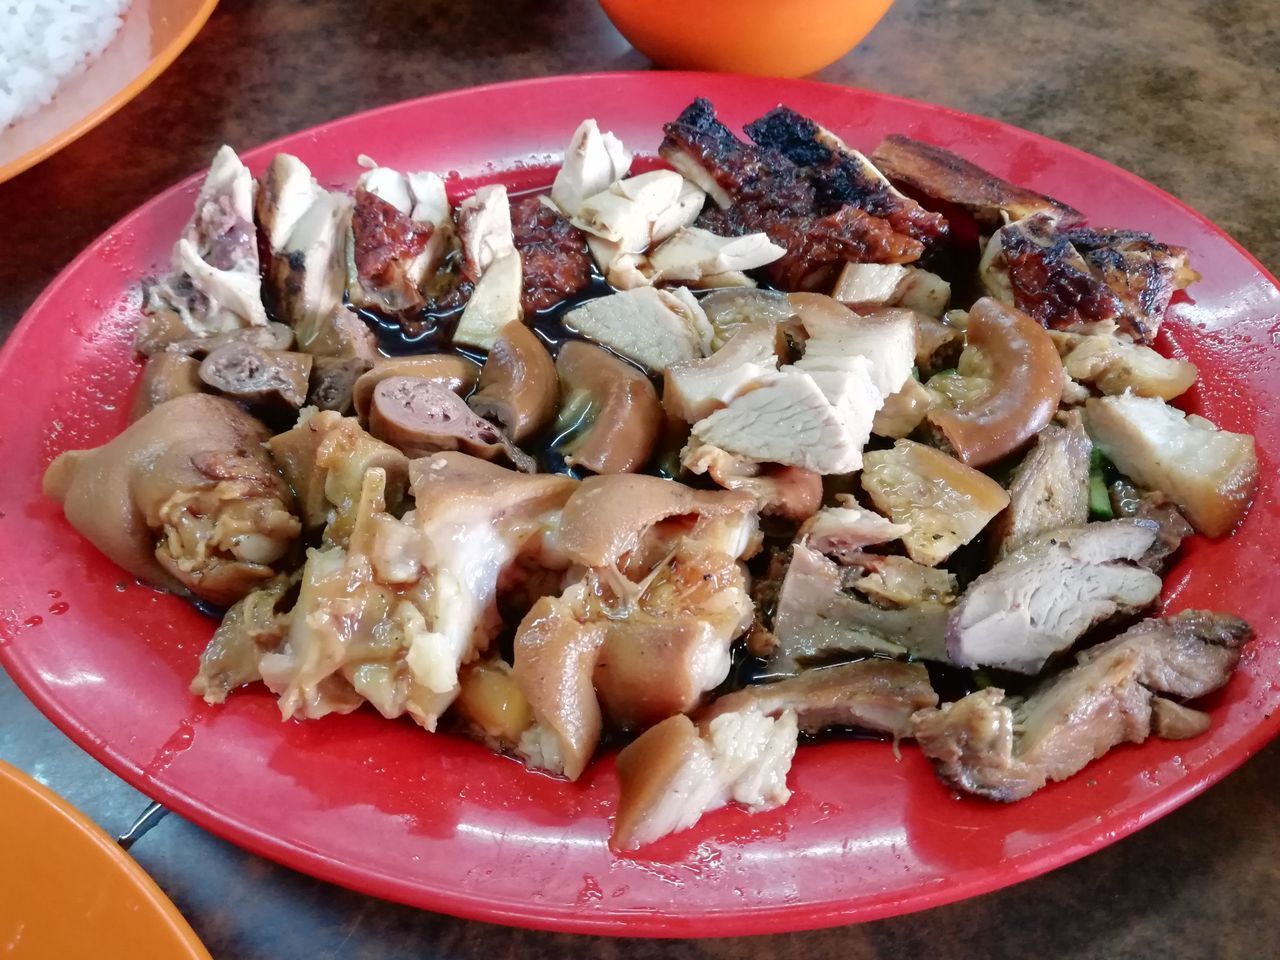 CLOSE-UP OF MEAT AND VEGETABLES IN PLATE